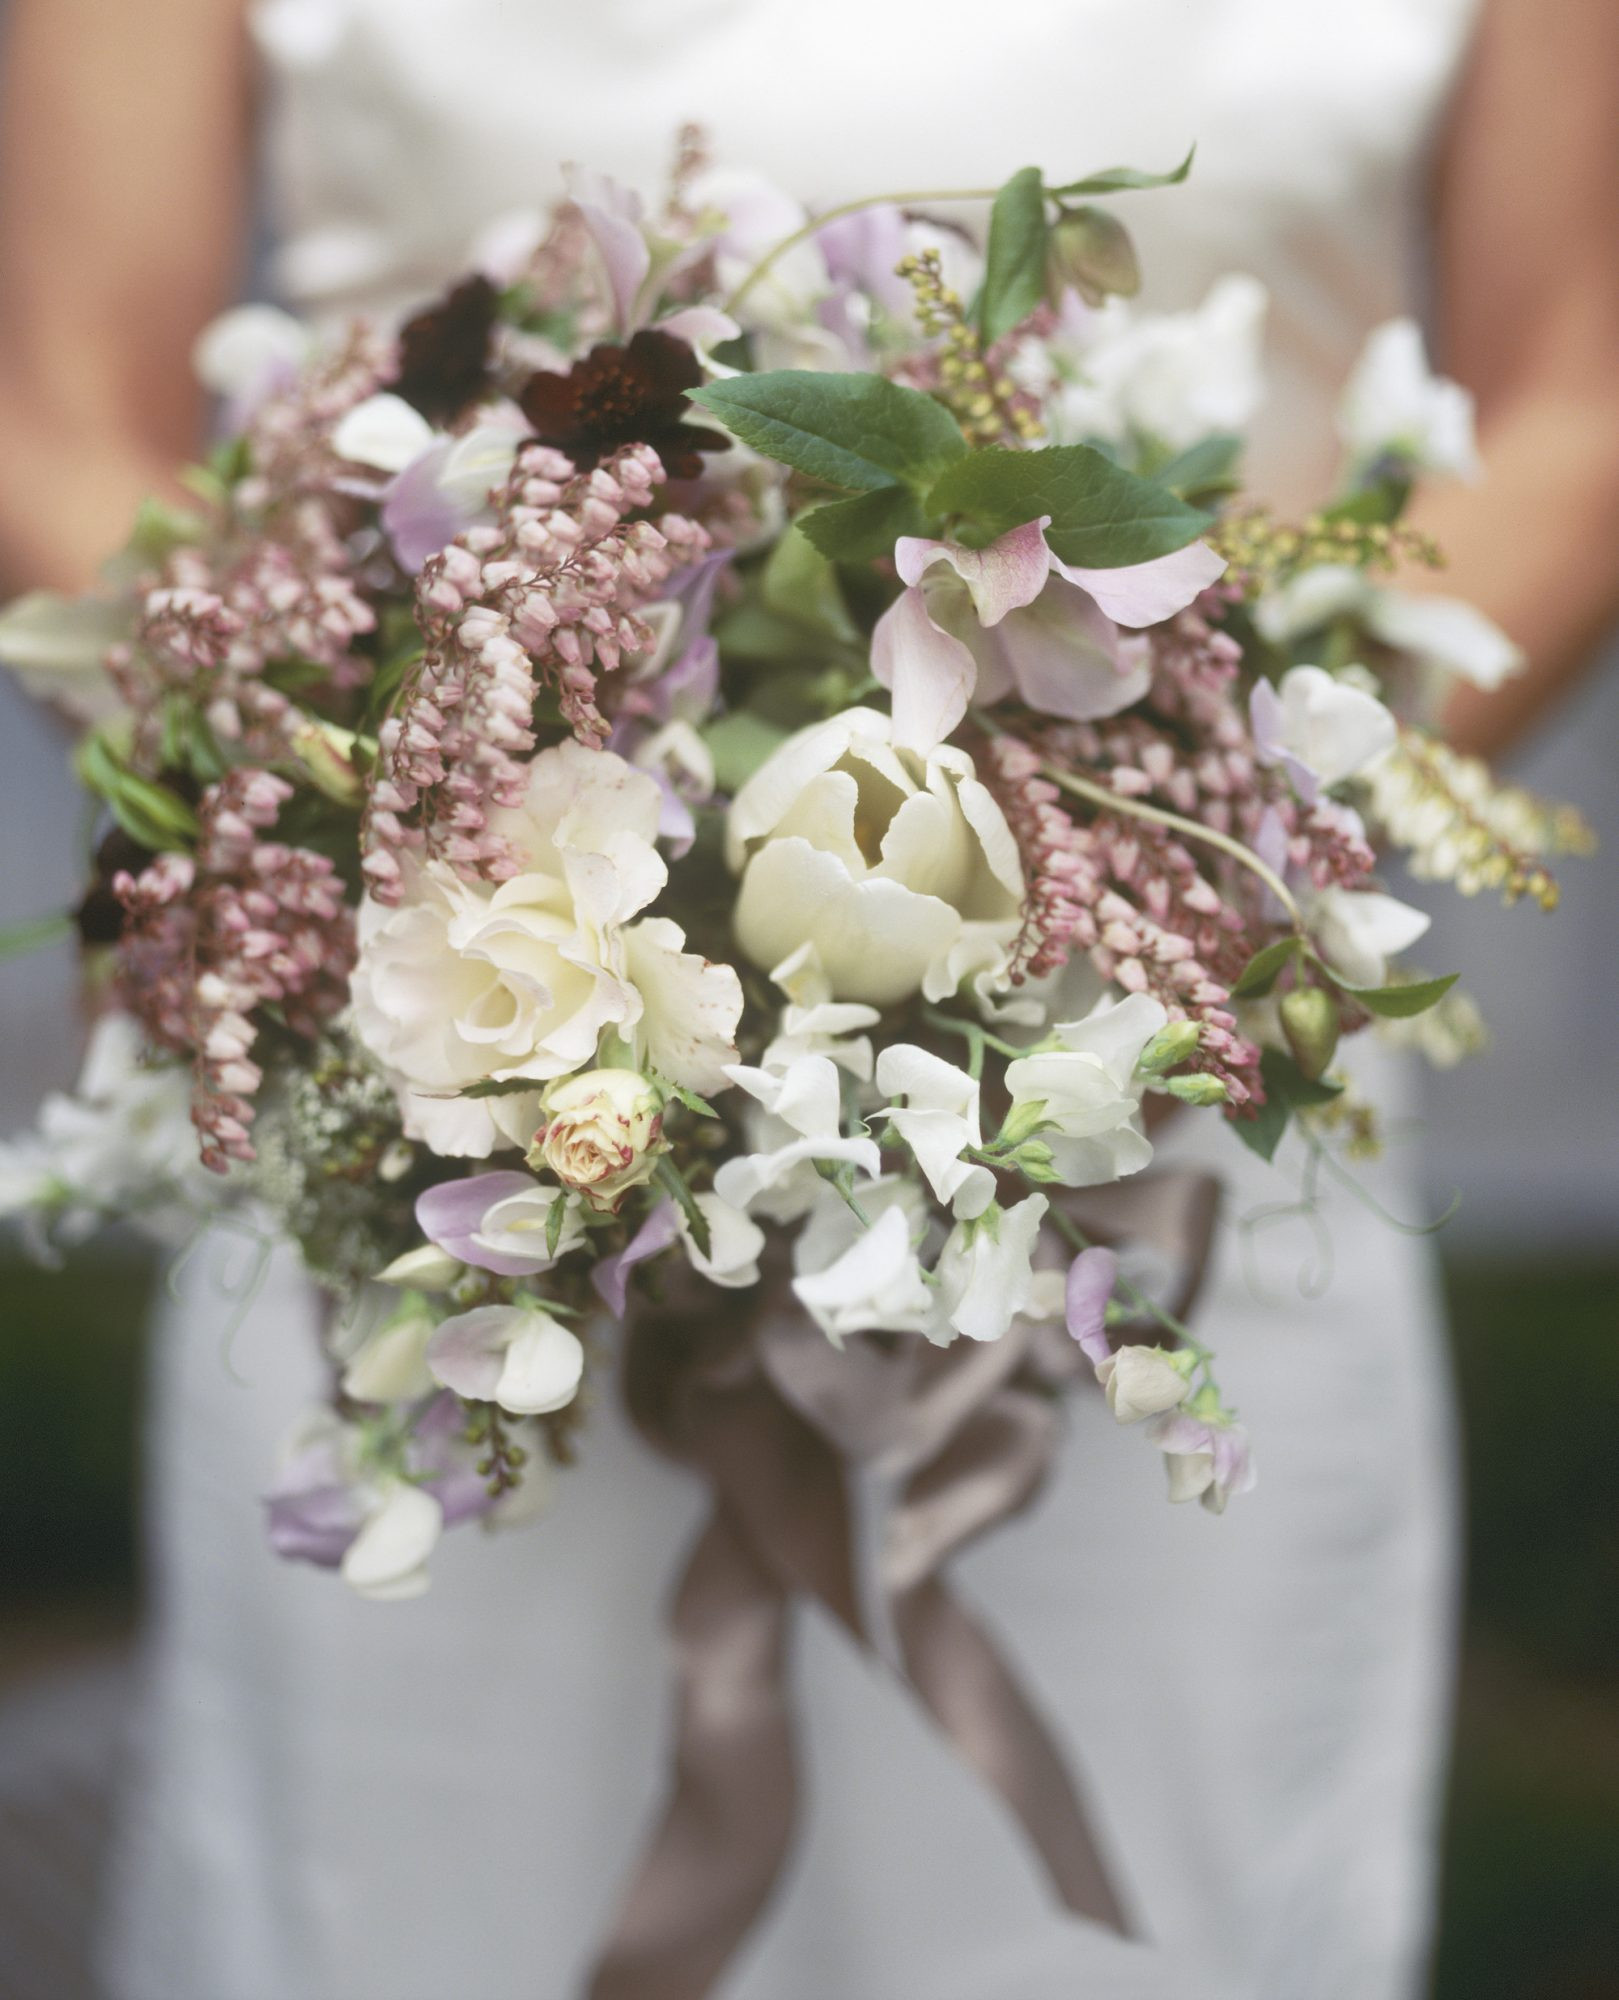 How To DIY Wedding Flowers
 Tips for DIY ing Your Wedding Bouquet — How to Arrange